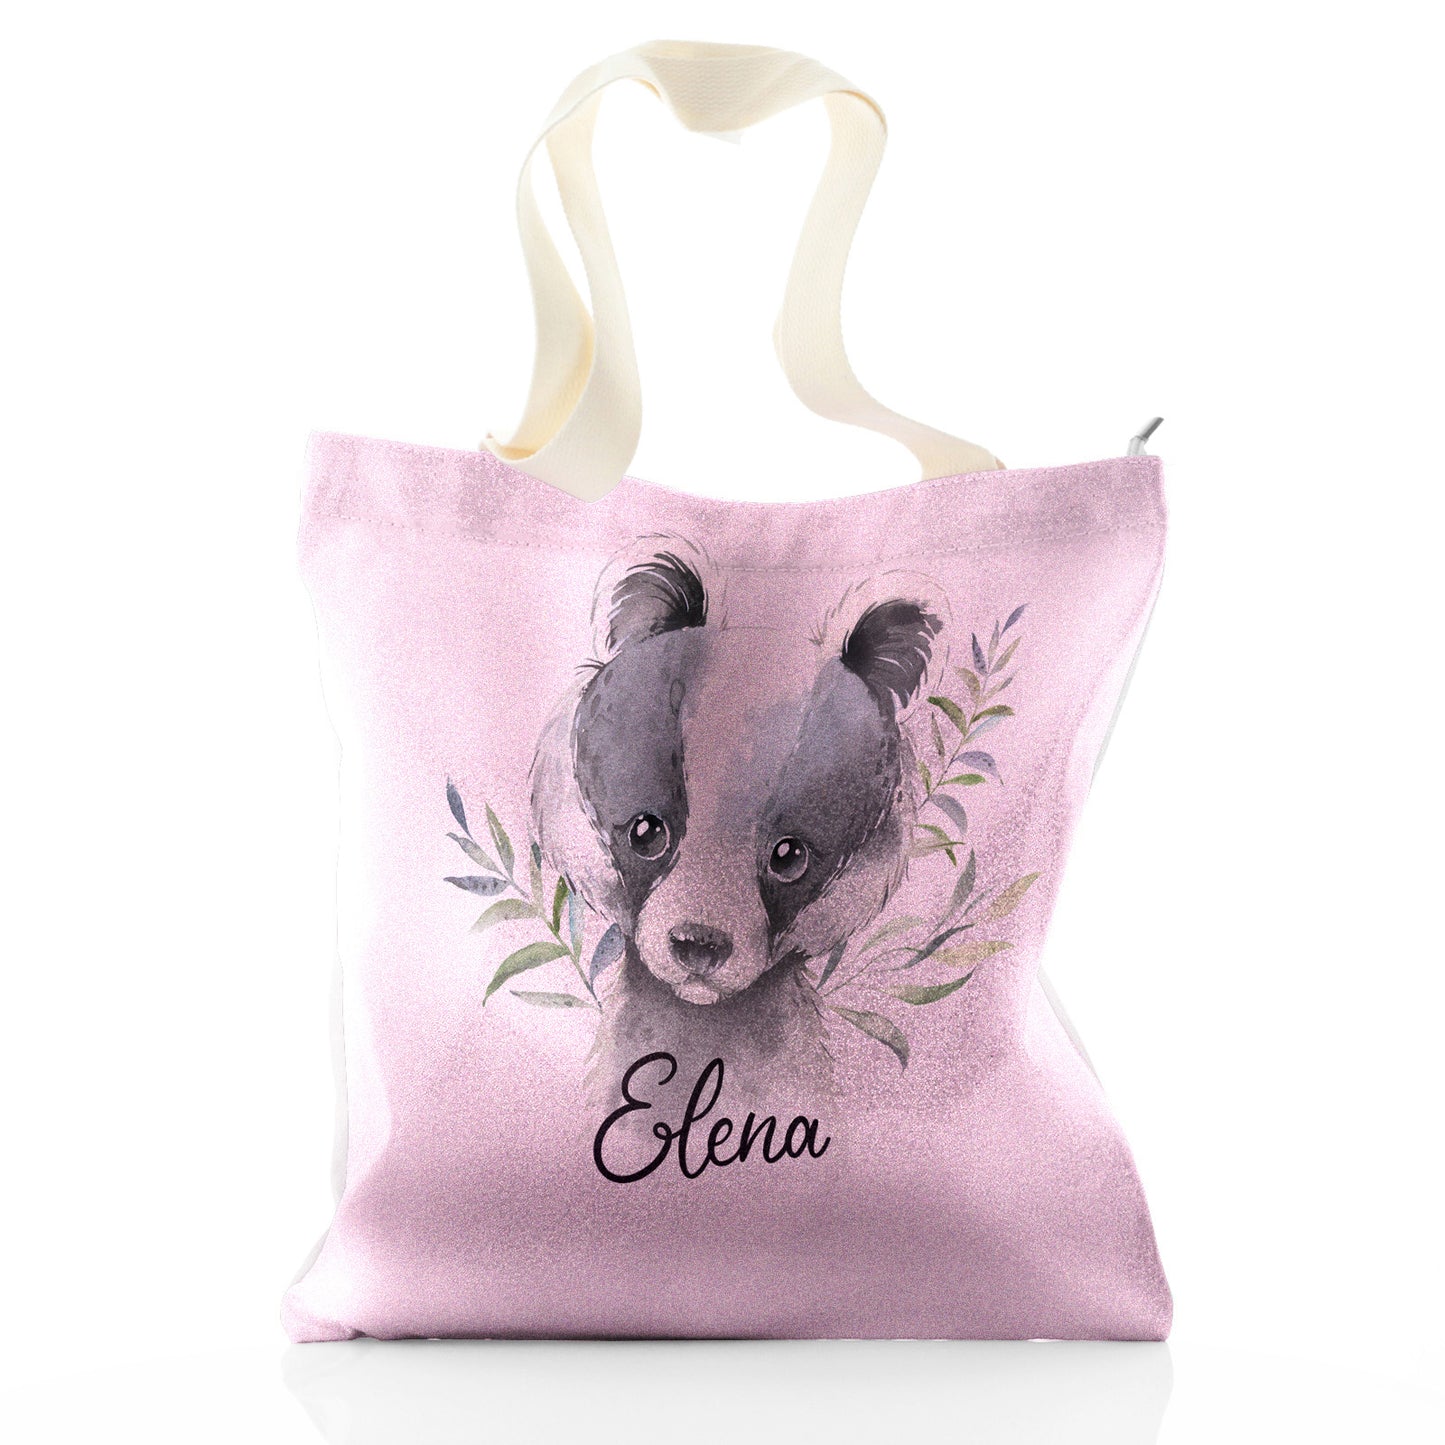 Personalised Glitter Tote Bag with Black and White Badger Leaves and Cute Text